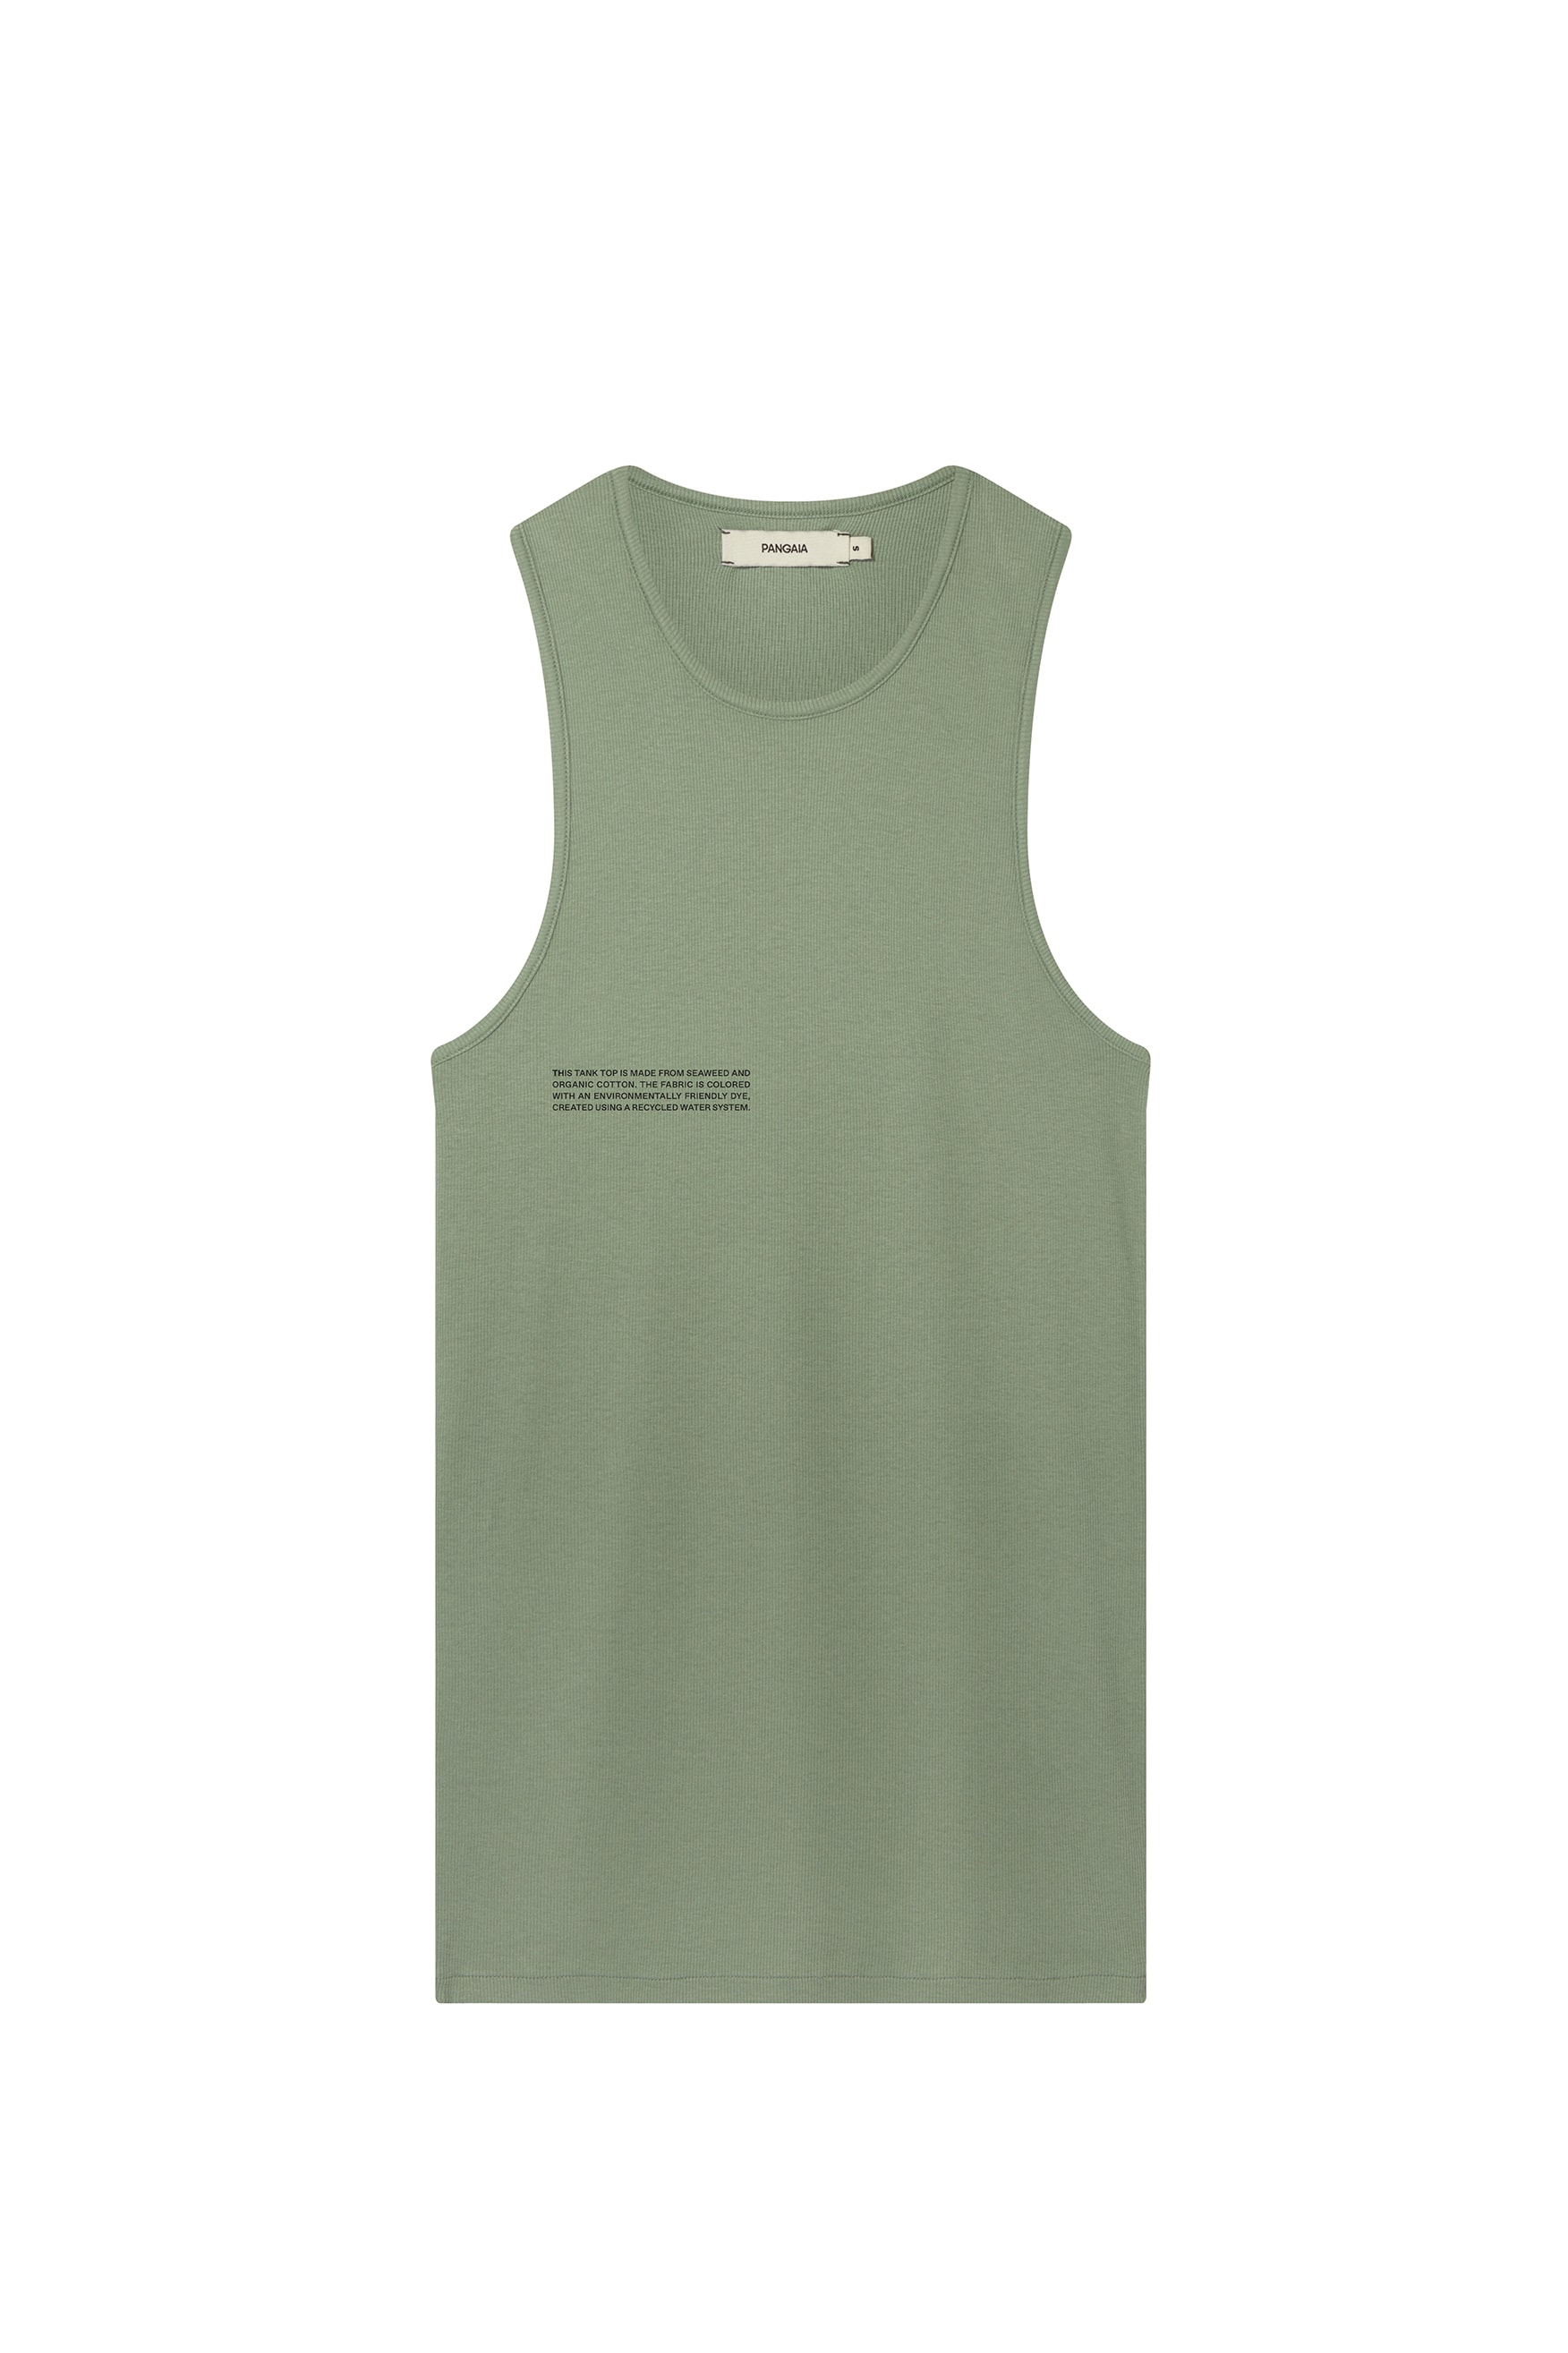 Pangaia Seaweed Tank Tops Dresses Release Dyed Sustainable Eco-friendly